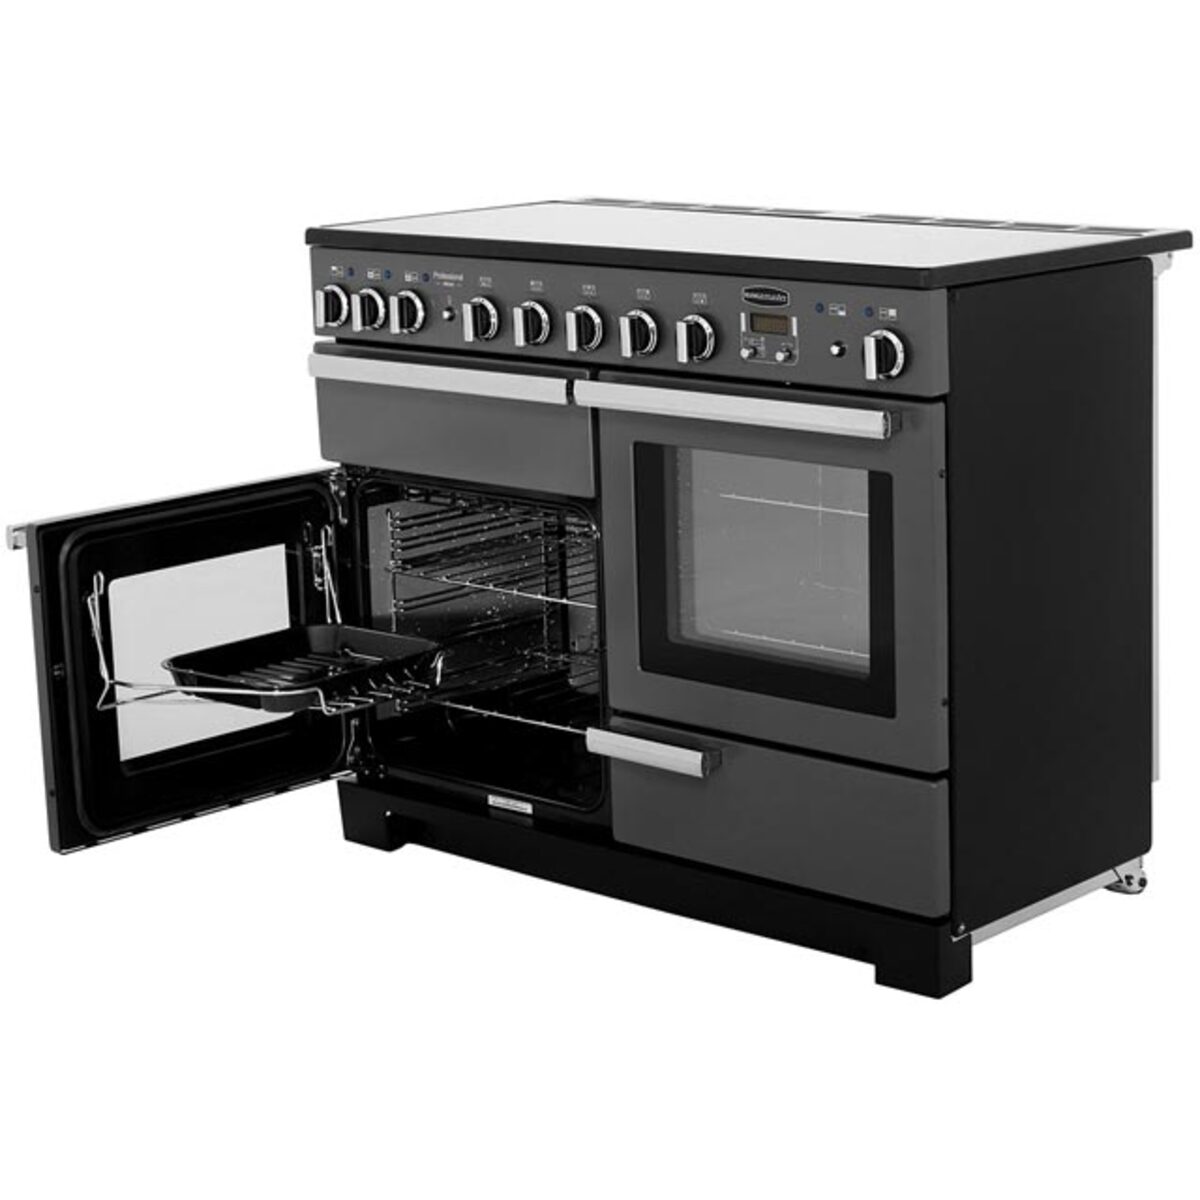 Rangemaster PDL110EICB/C PROFESSIONAL DELUXE 110cm Induction Cooker, Charcoal Bk